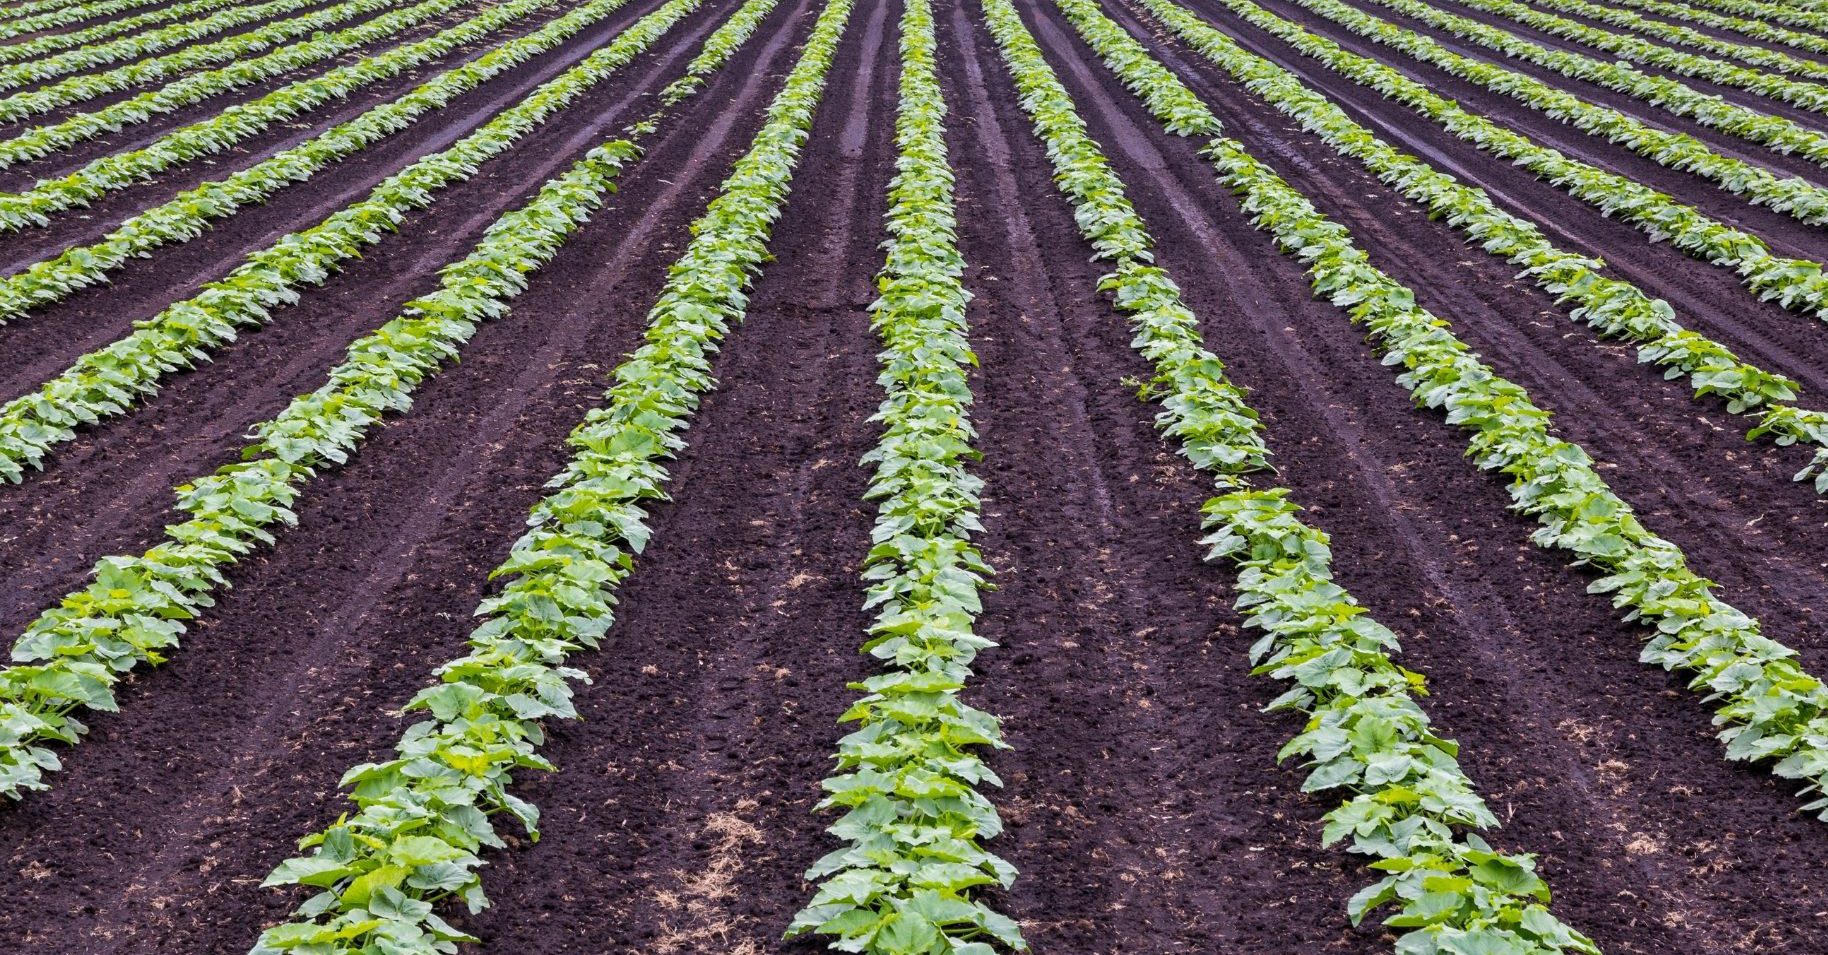 Global Crop Production Market Size, Forecasts, And Opportunities – Includes Crop Production Method